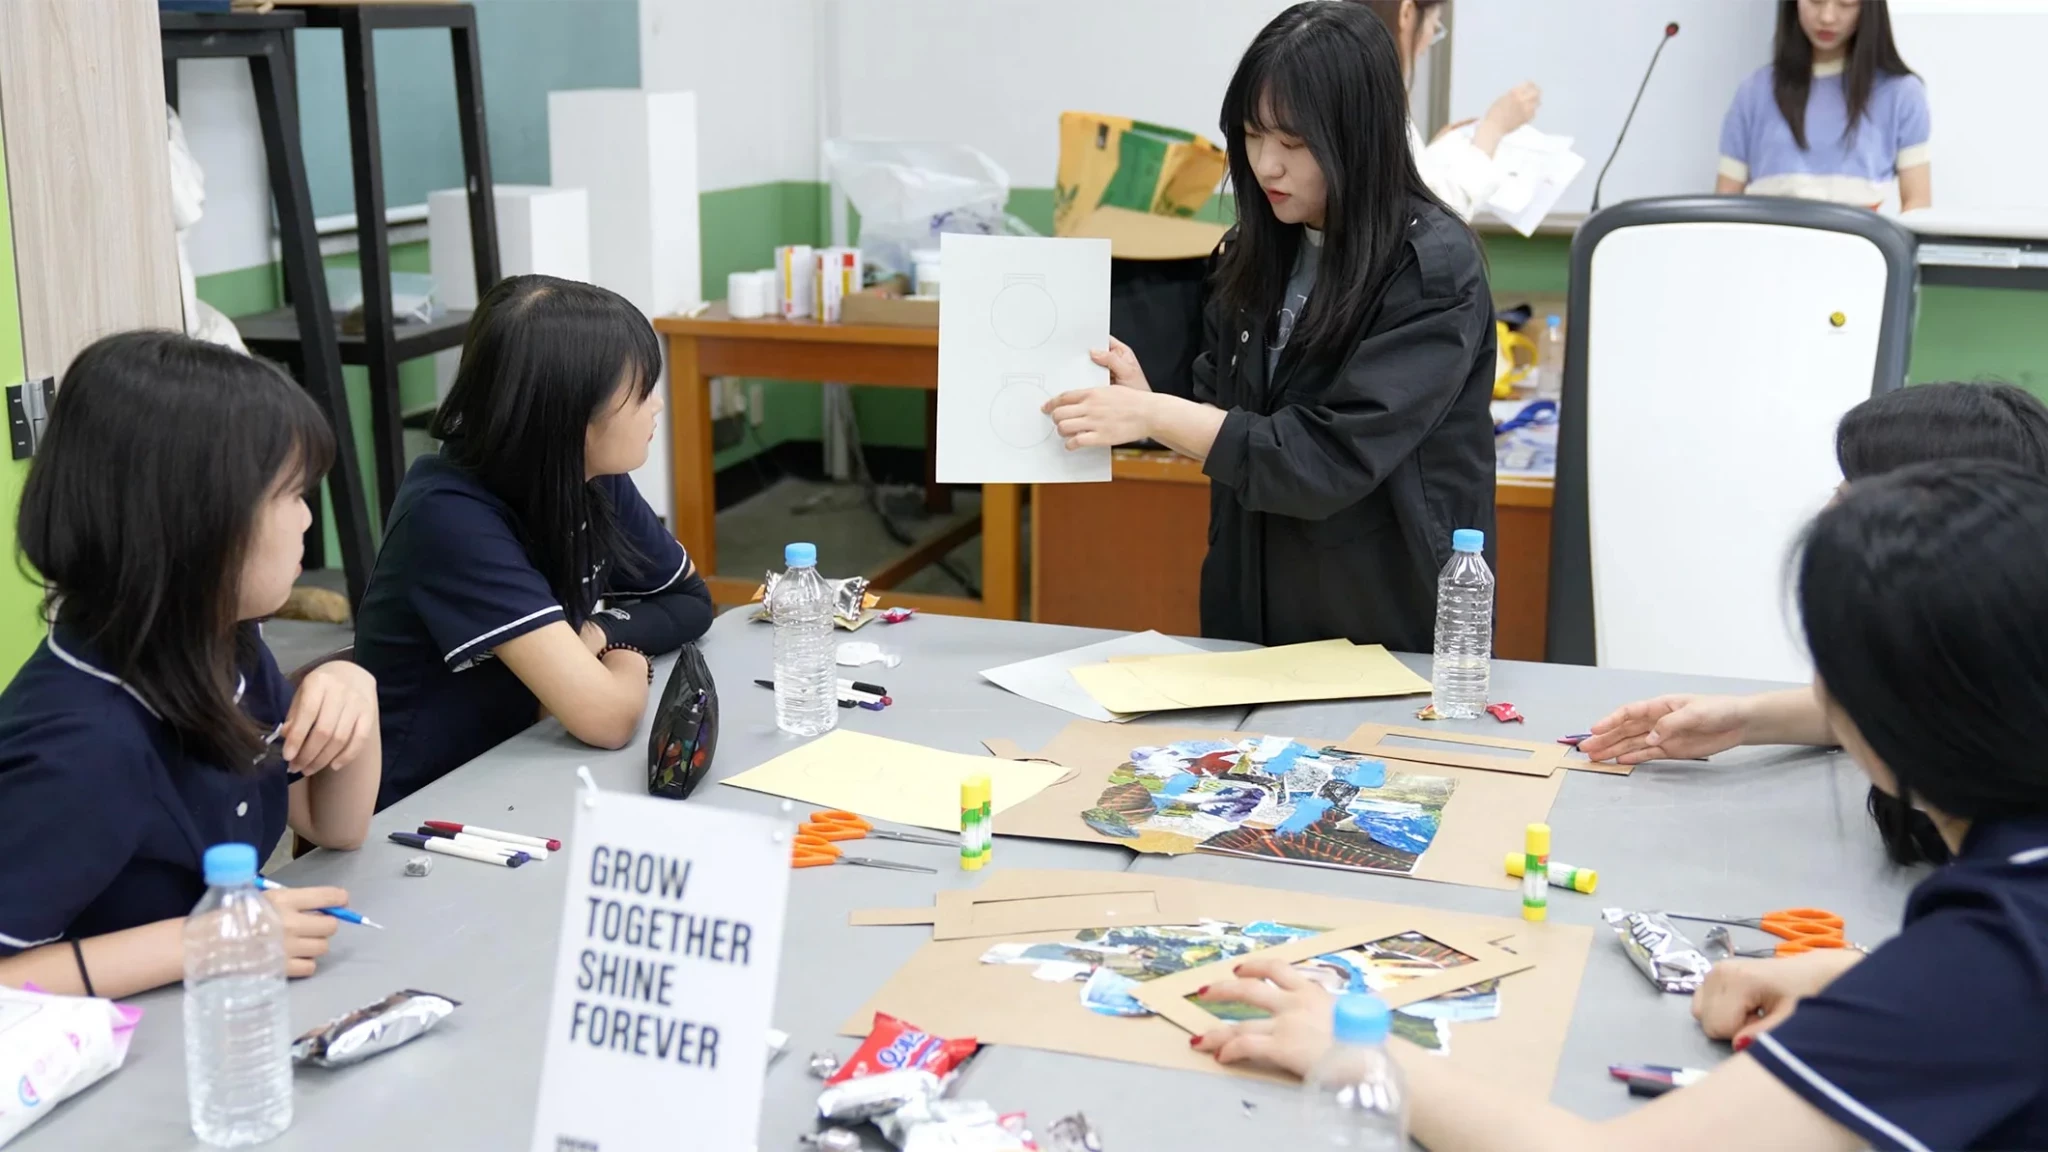 Gangwon 2024 had young people offer input for the Games' creative elements such as medal design ©IOC